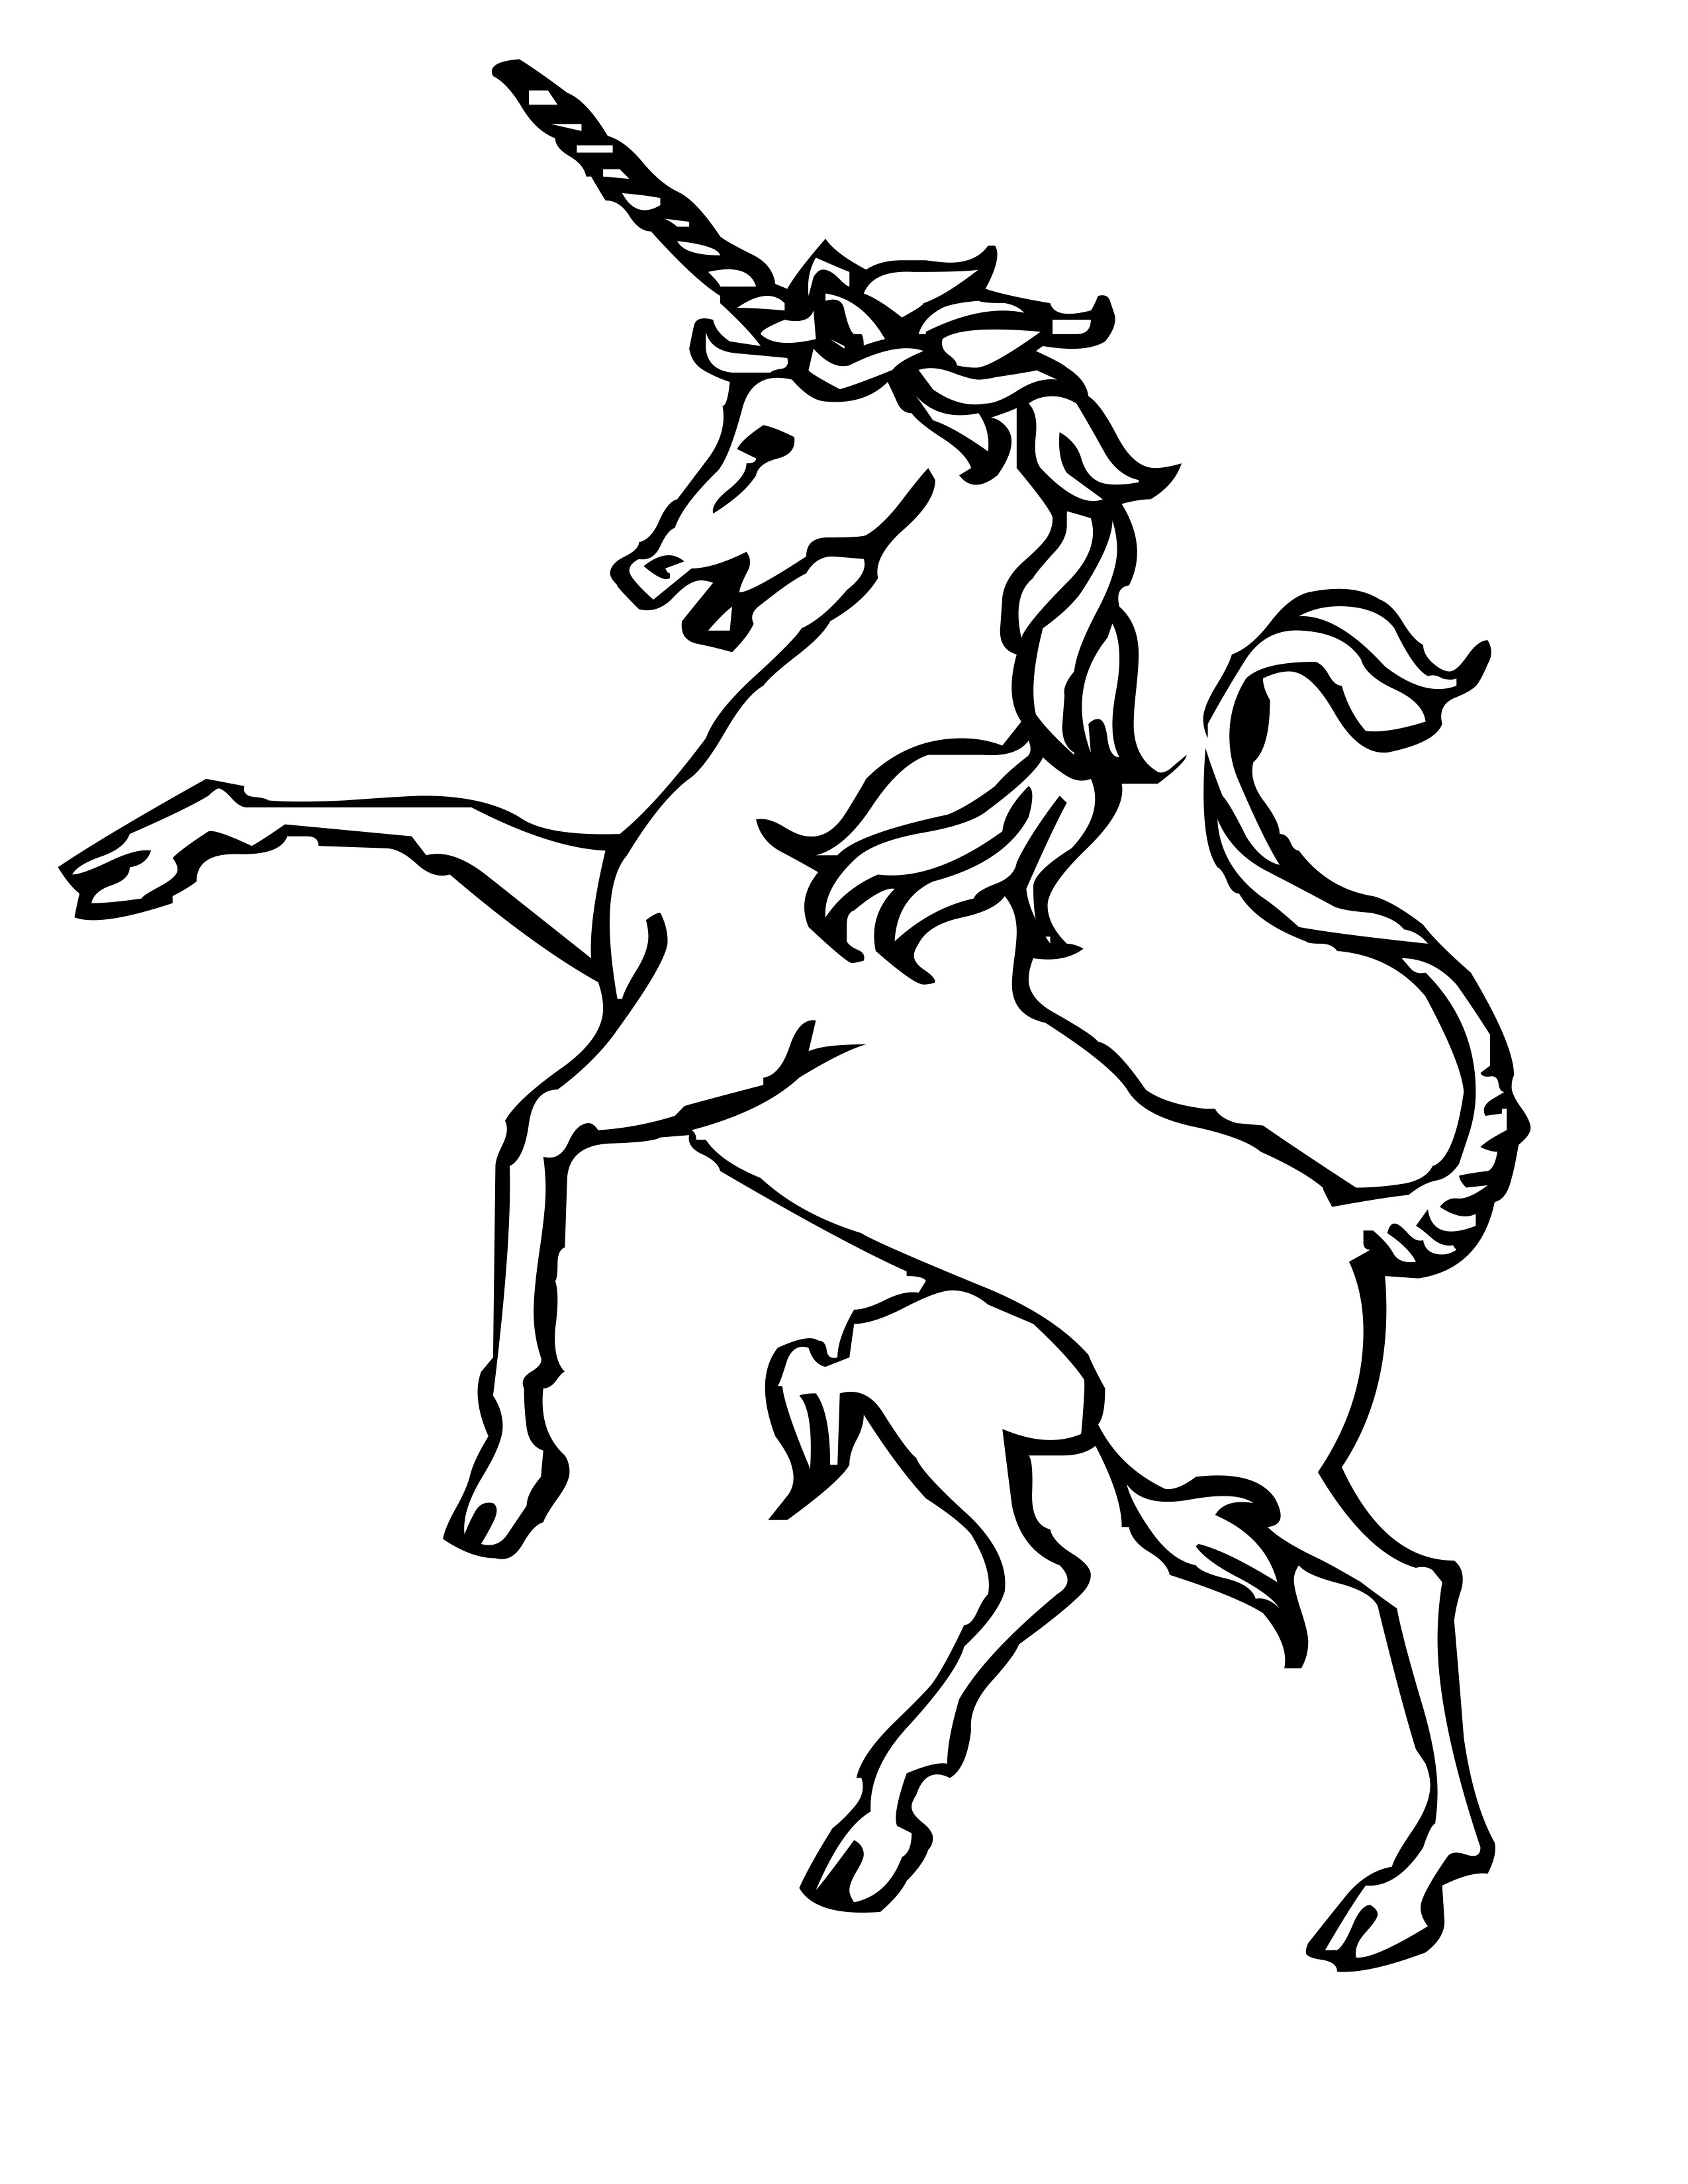 Unicorn Outline | Free download on ClipArtMag